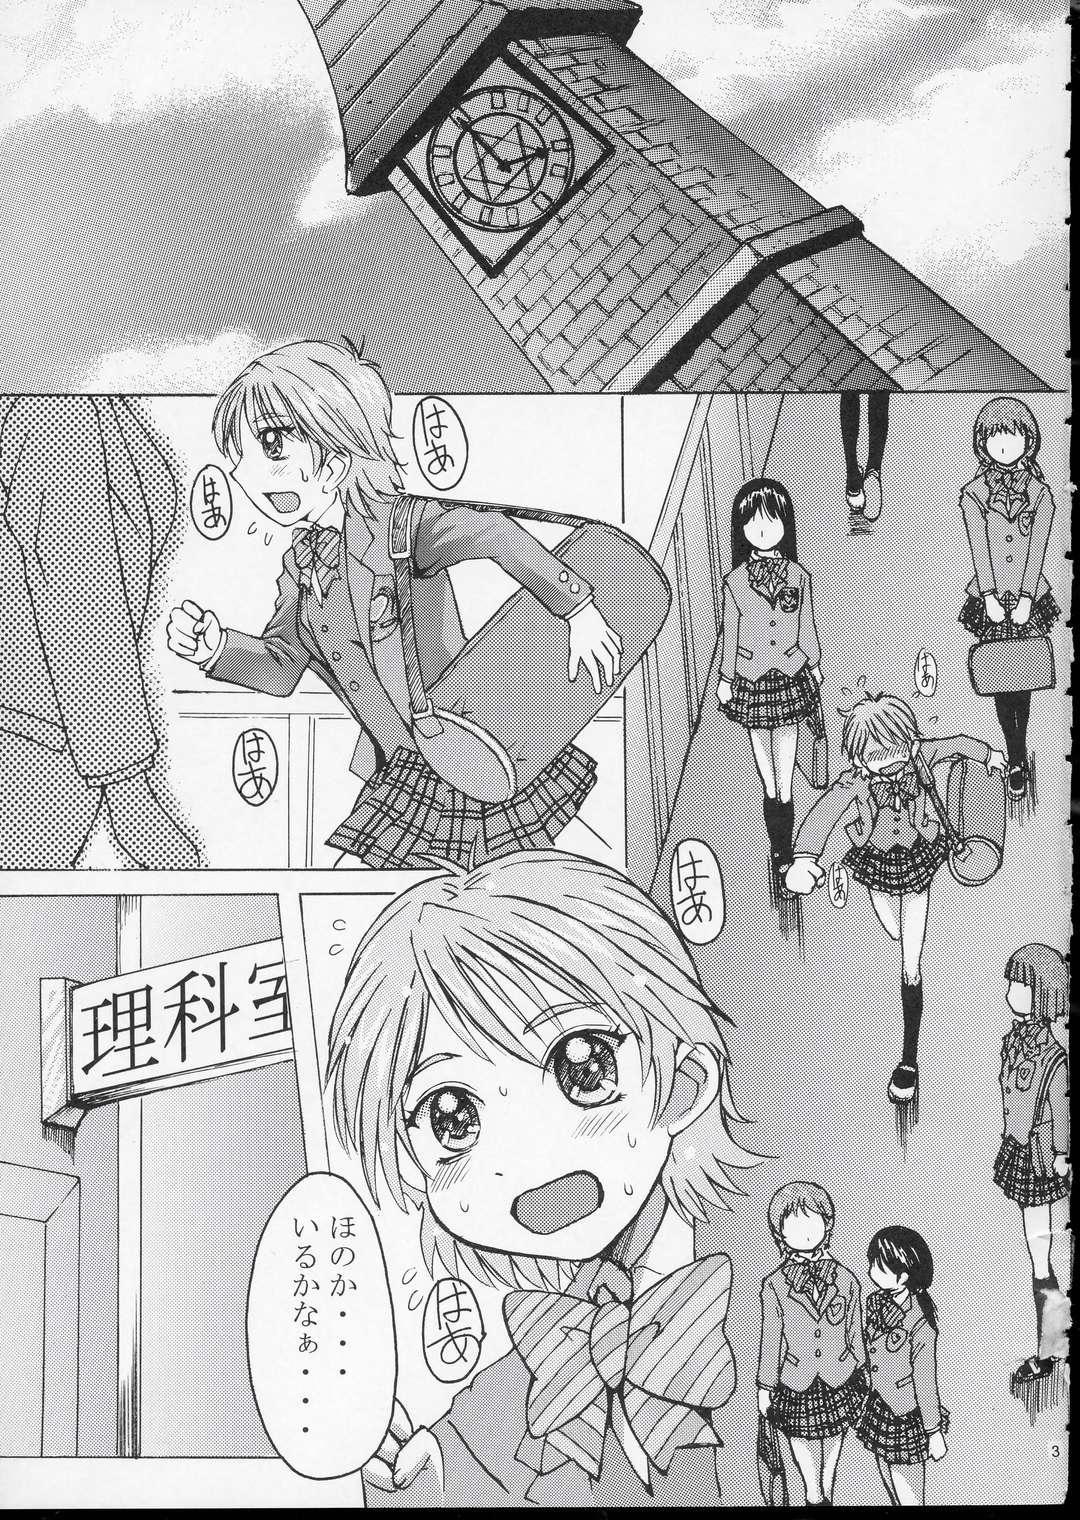  Kuroi Taiyou Kage no Tsuki EPISODE 1: In order that all may love you - Black Sun and Shadow Moon - Pretty cure Titty Fuck - Page 4